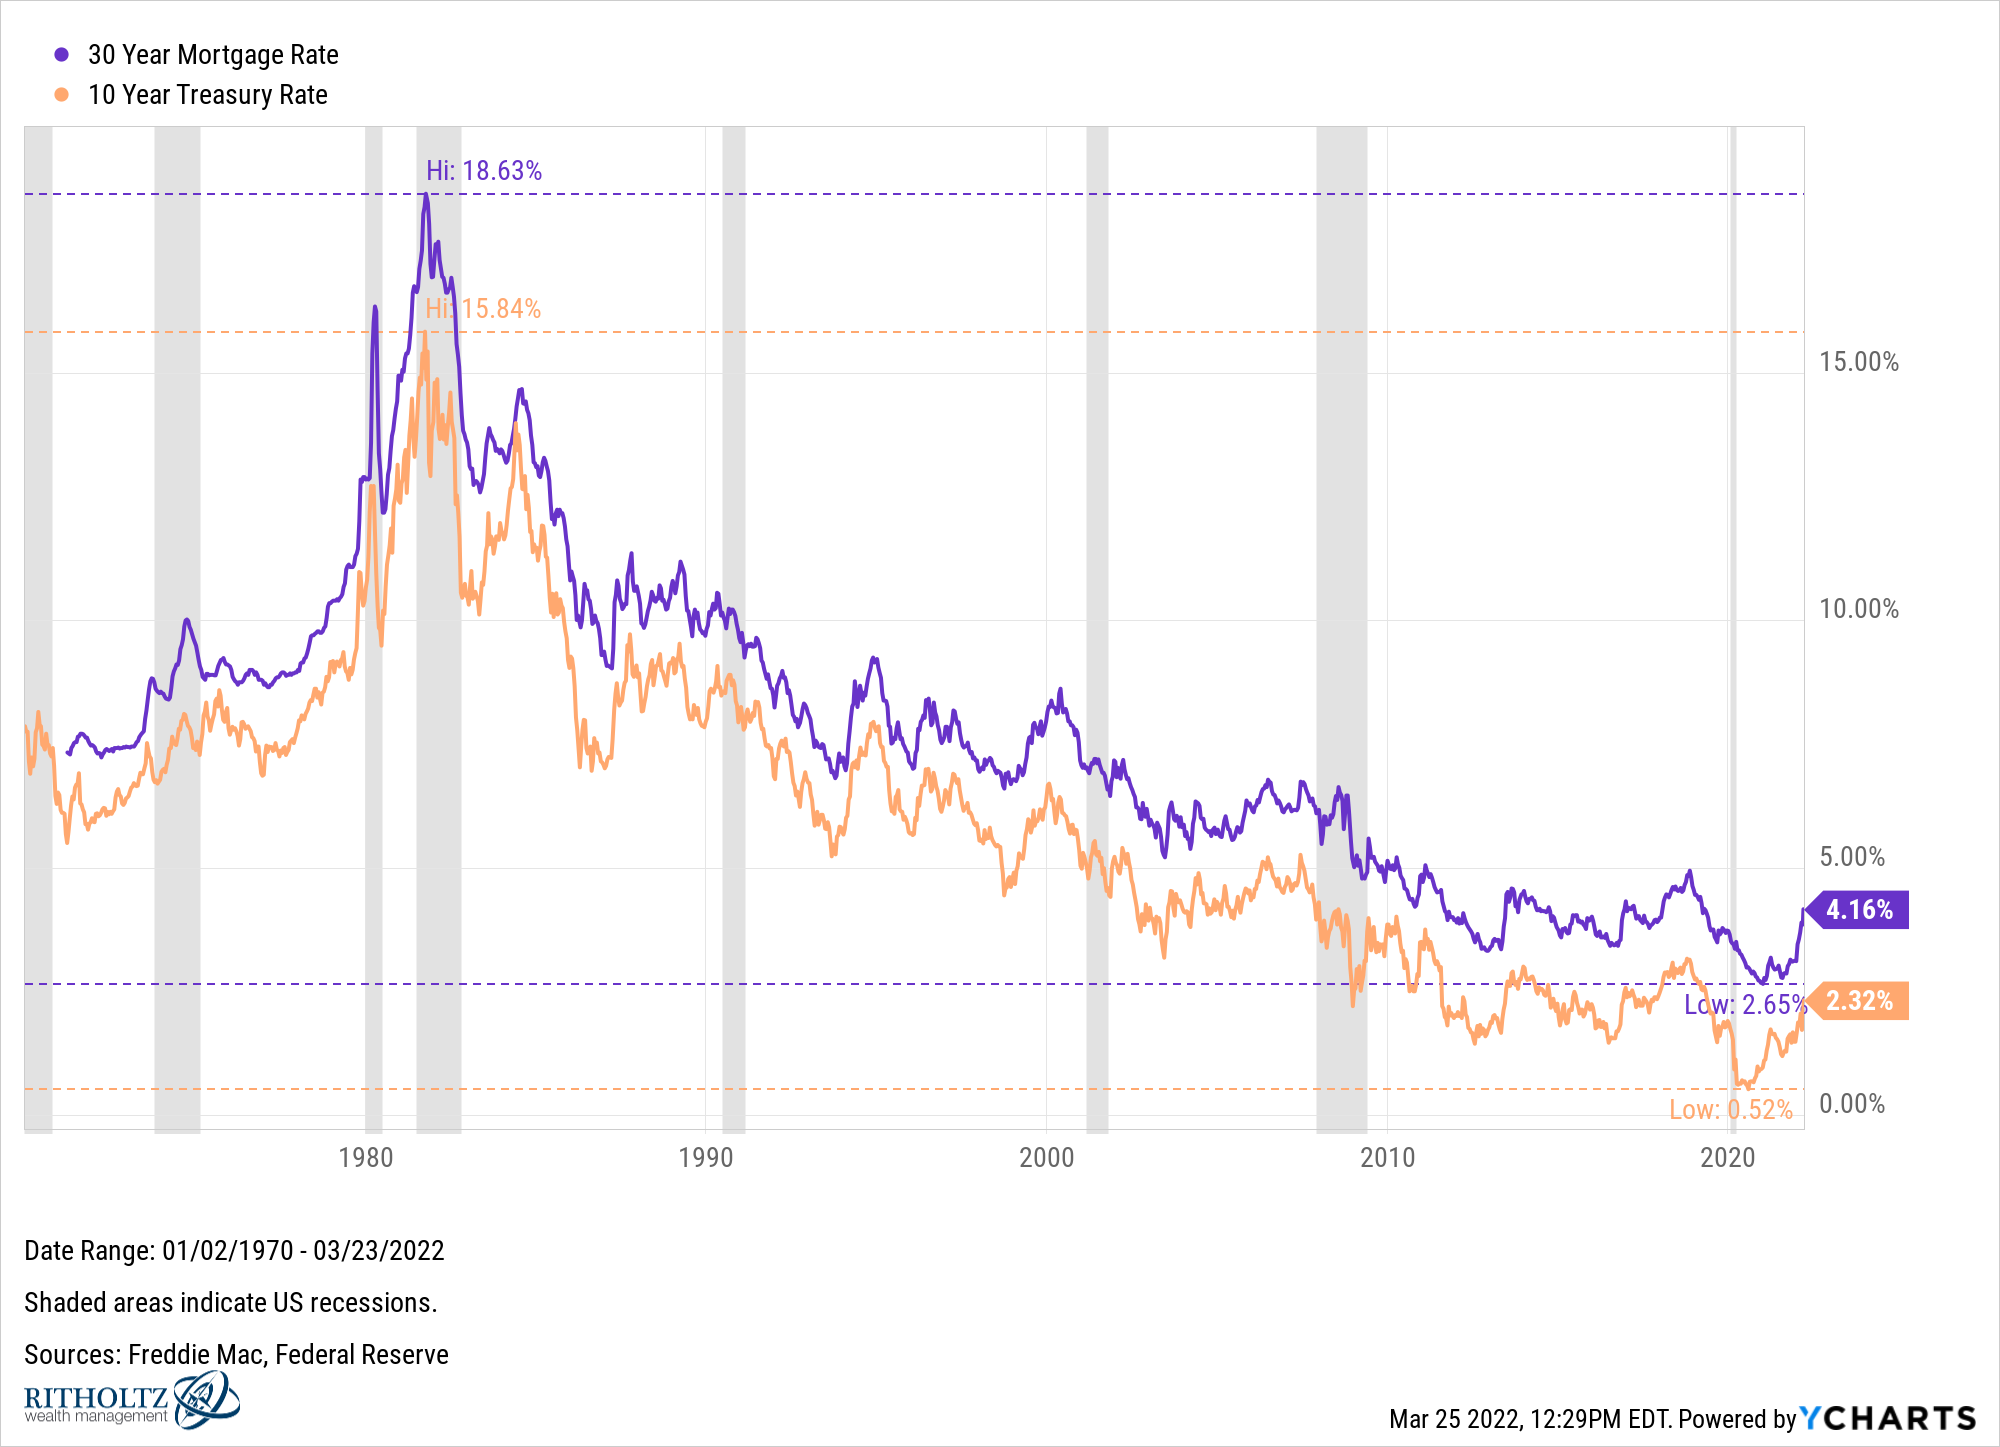 30 Year Mortgage compared to 10 Year Treasury since 1970